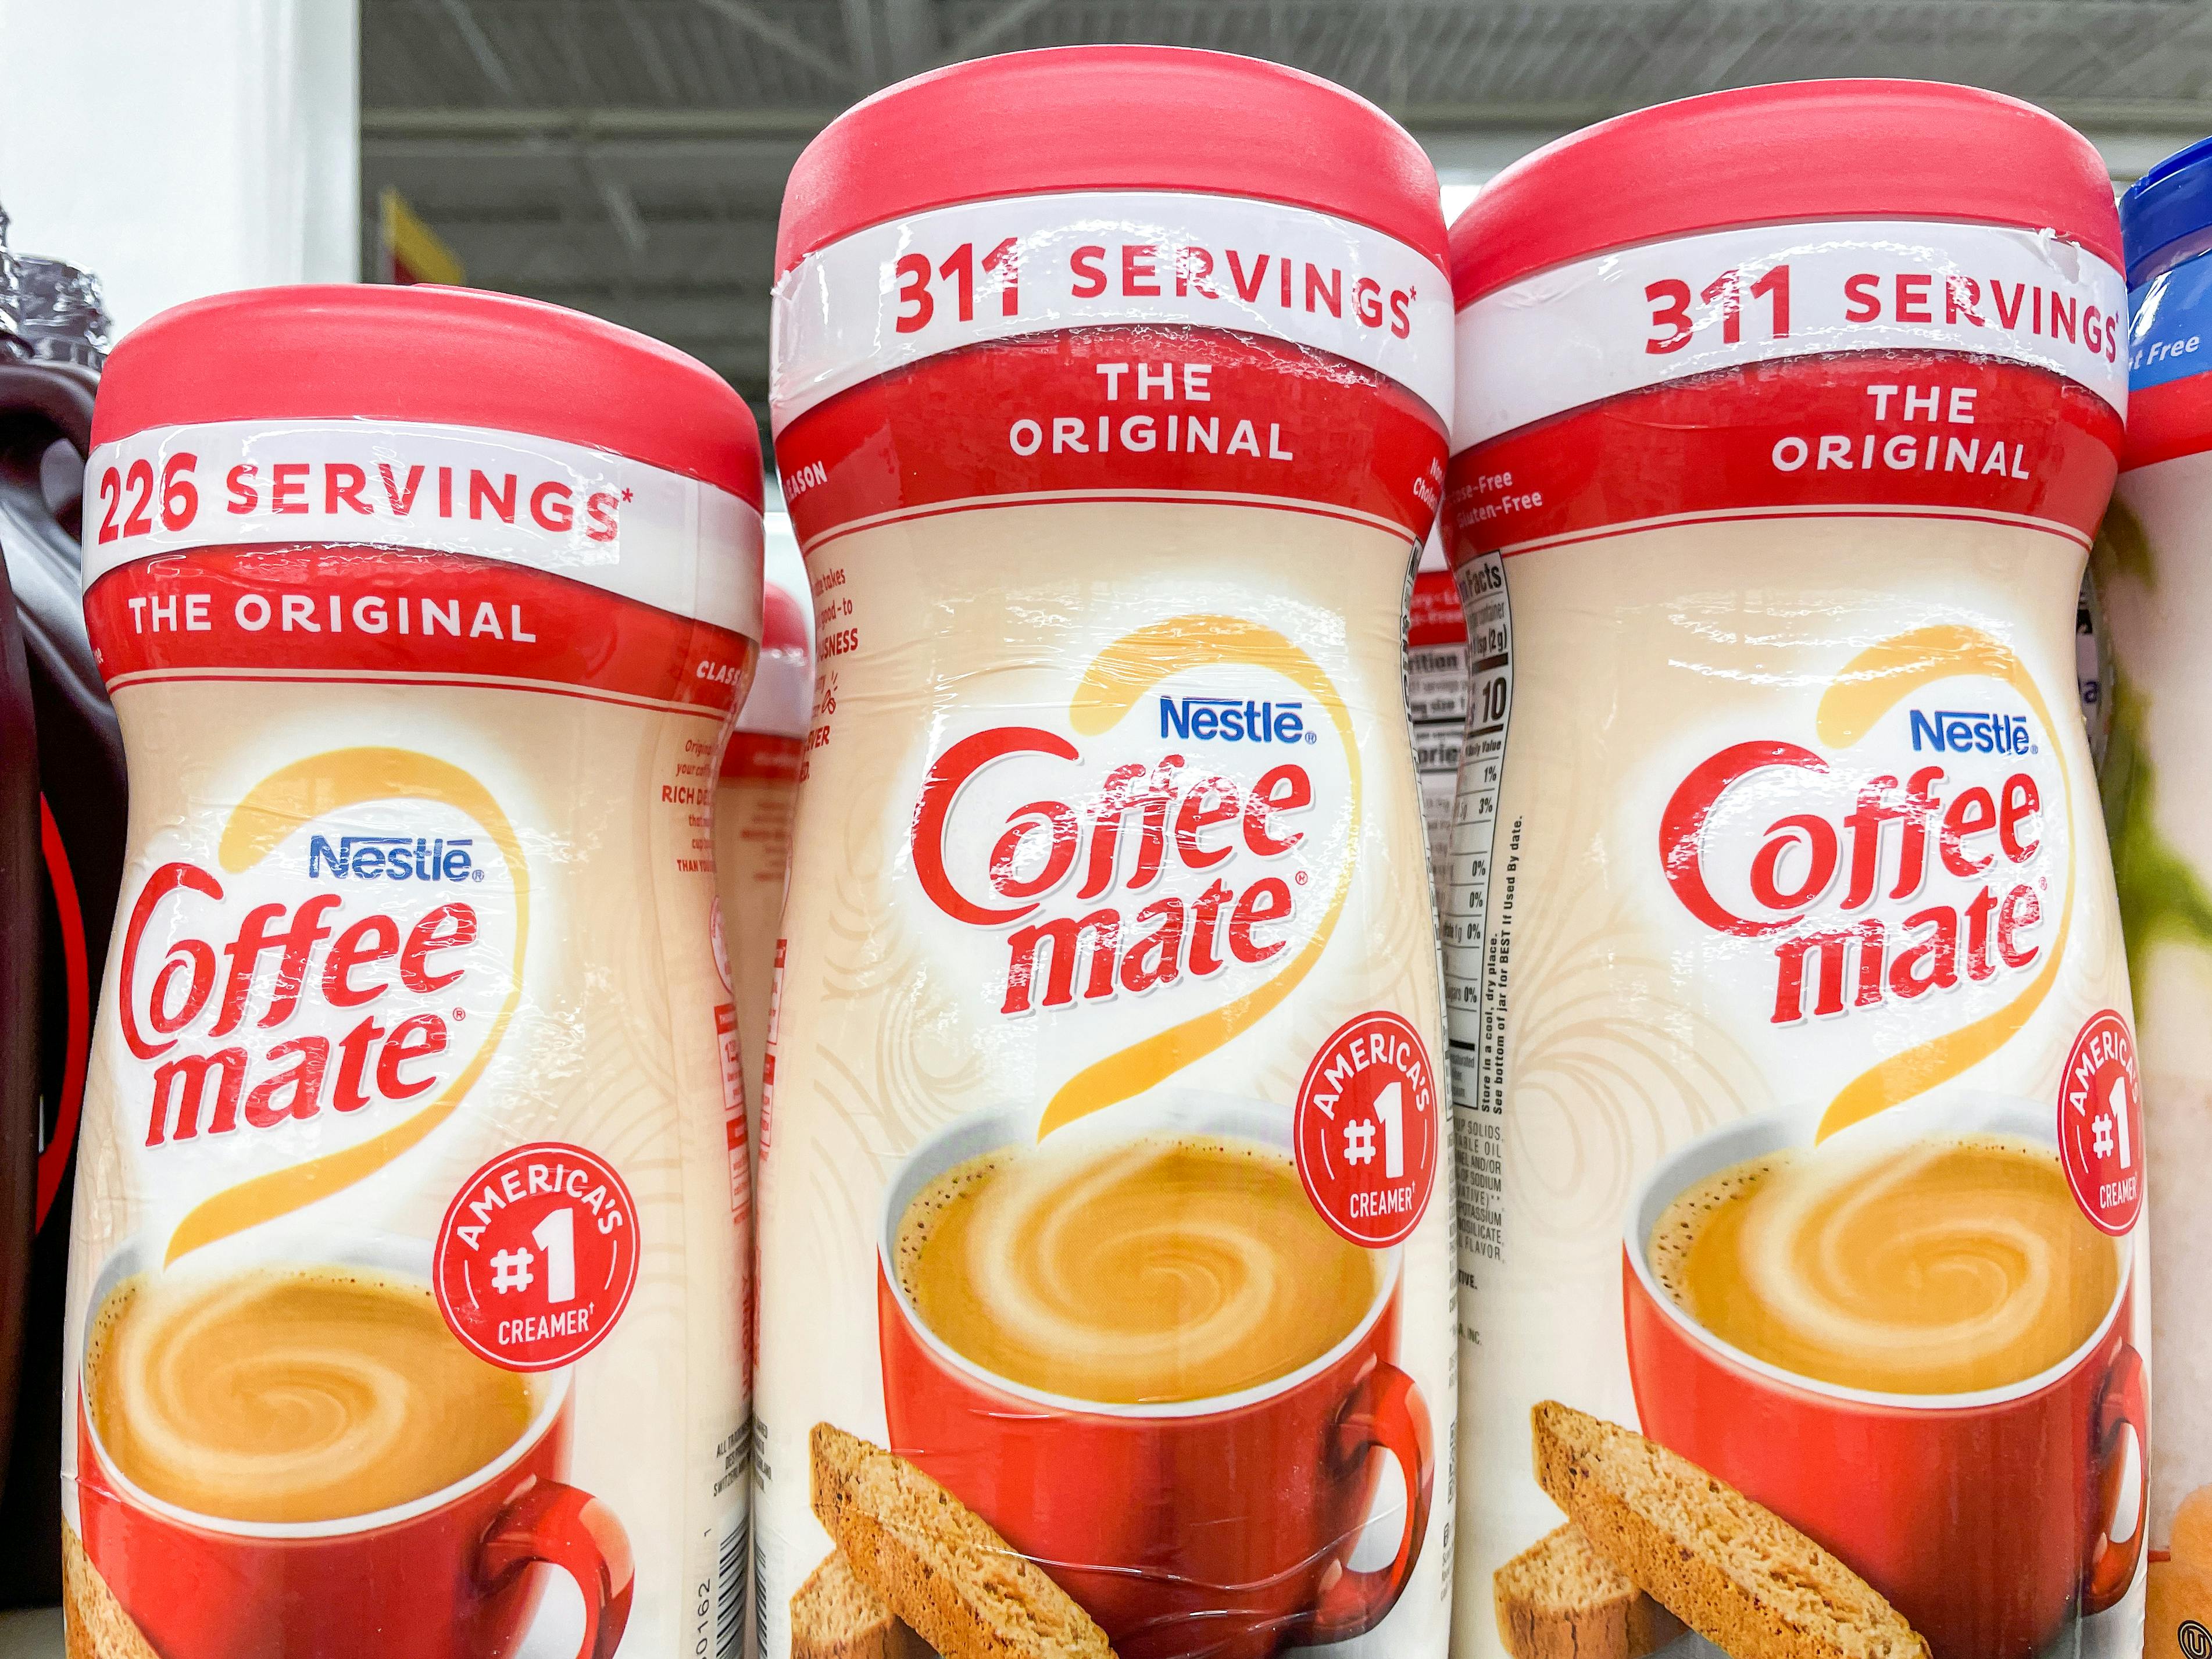 Containers of Coffee Mate powder creamer in a store showing the advertised serving sizes